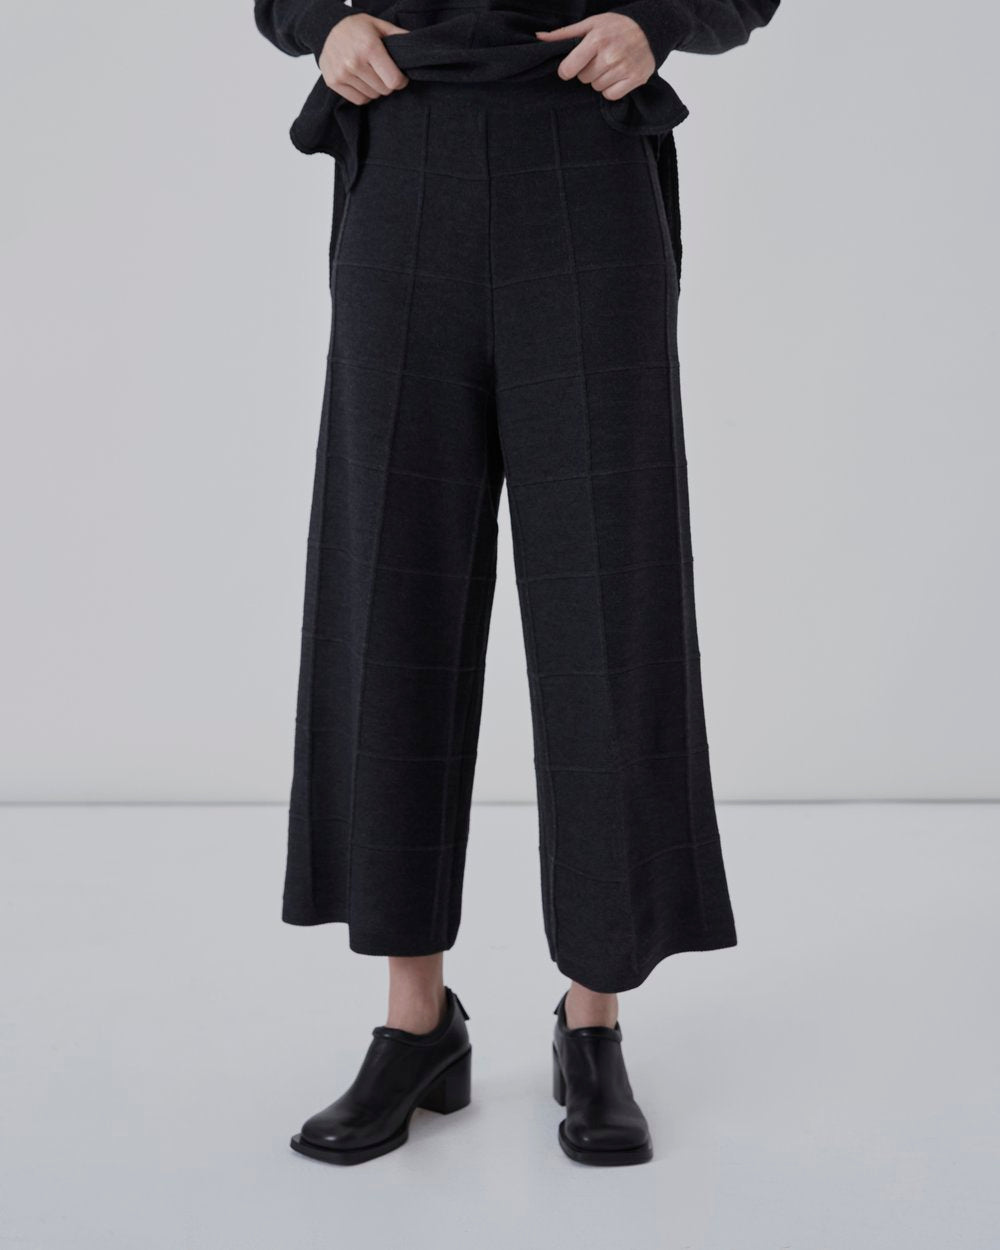 Napo Charcoal Trousers